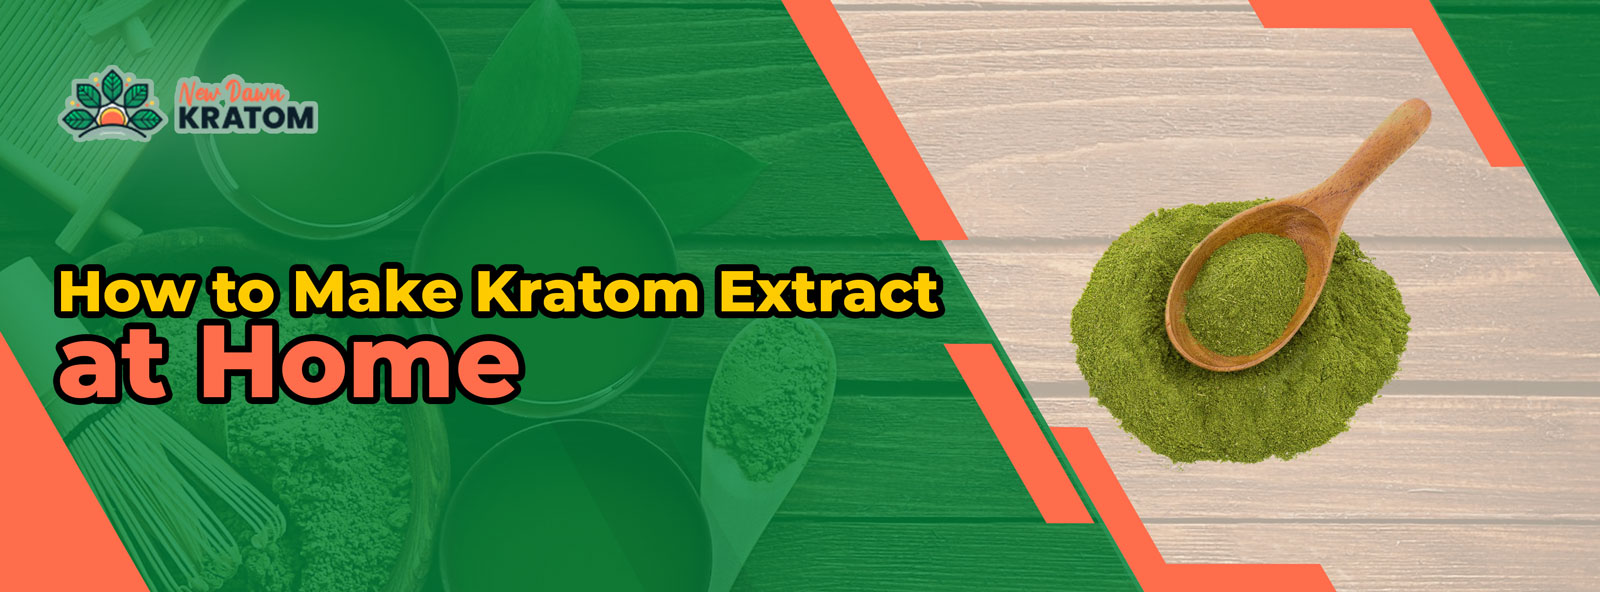 how-to-make-kratom-extract-at-home-banner